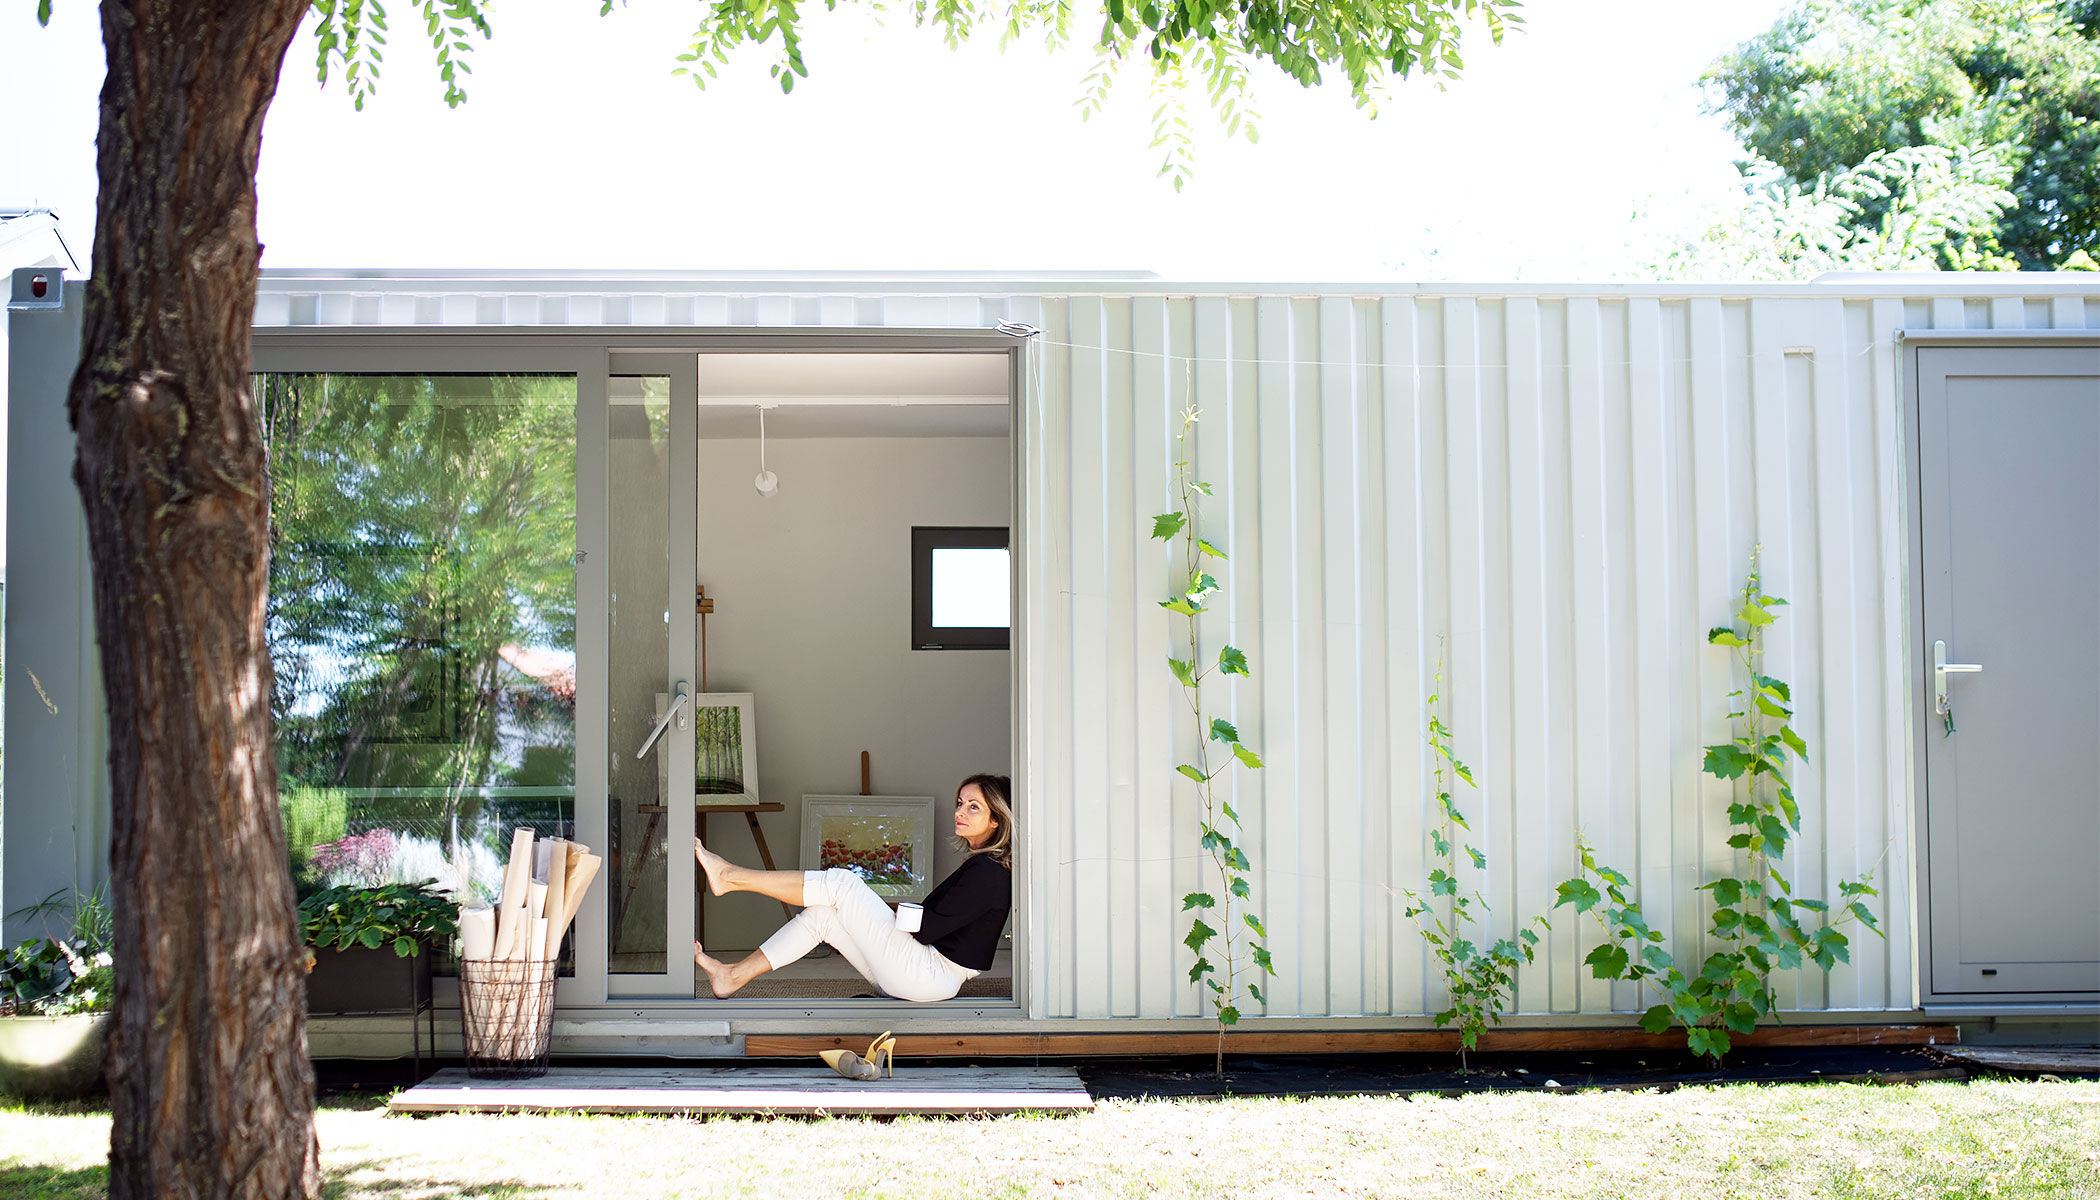 Shipping Container Homes: Pros and Cons - BigSteelBox